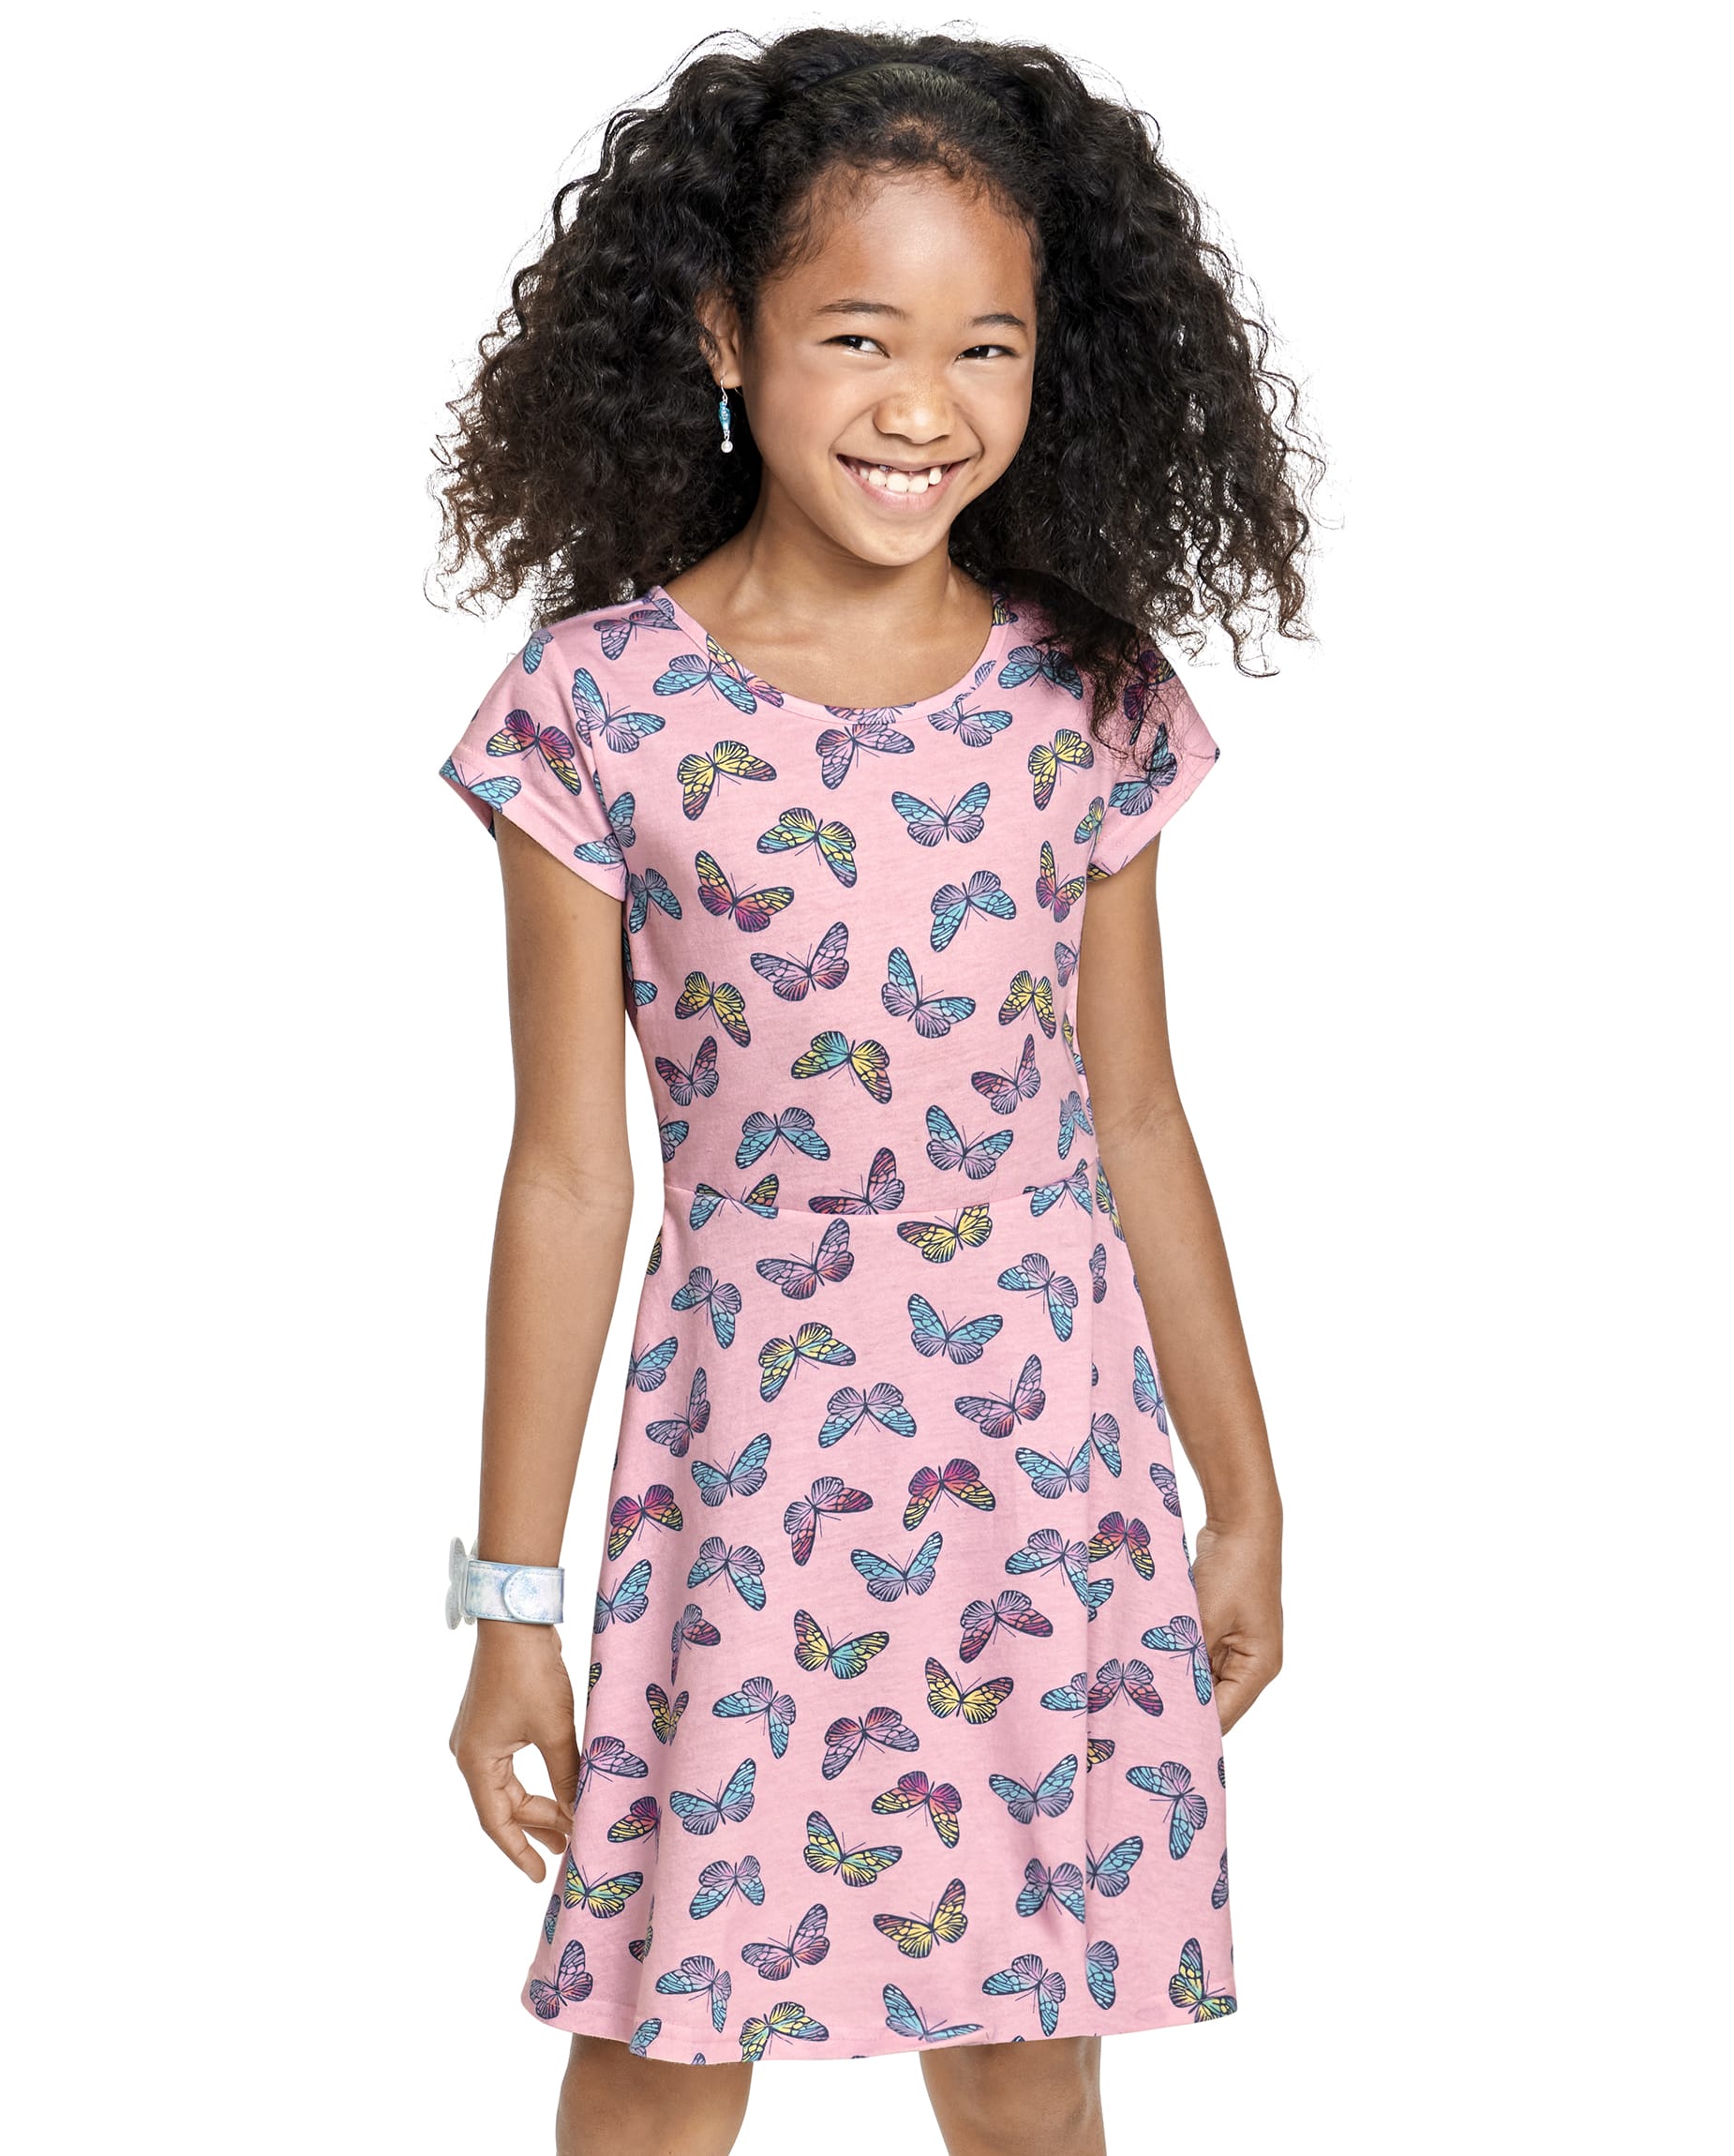 Girls' Shater Dresses $5.99-$7.99 + Free Shipping